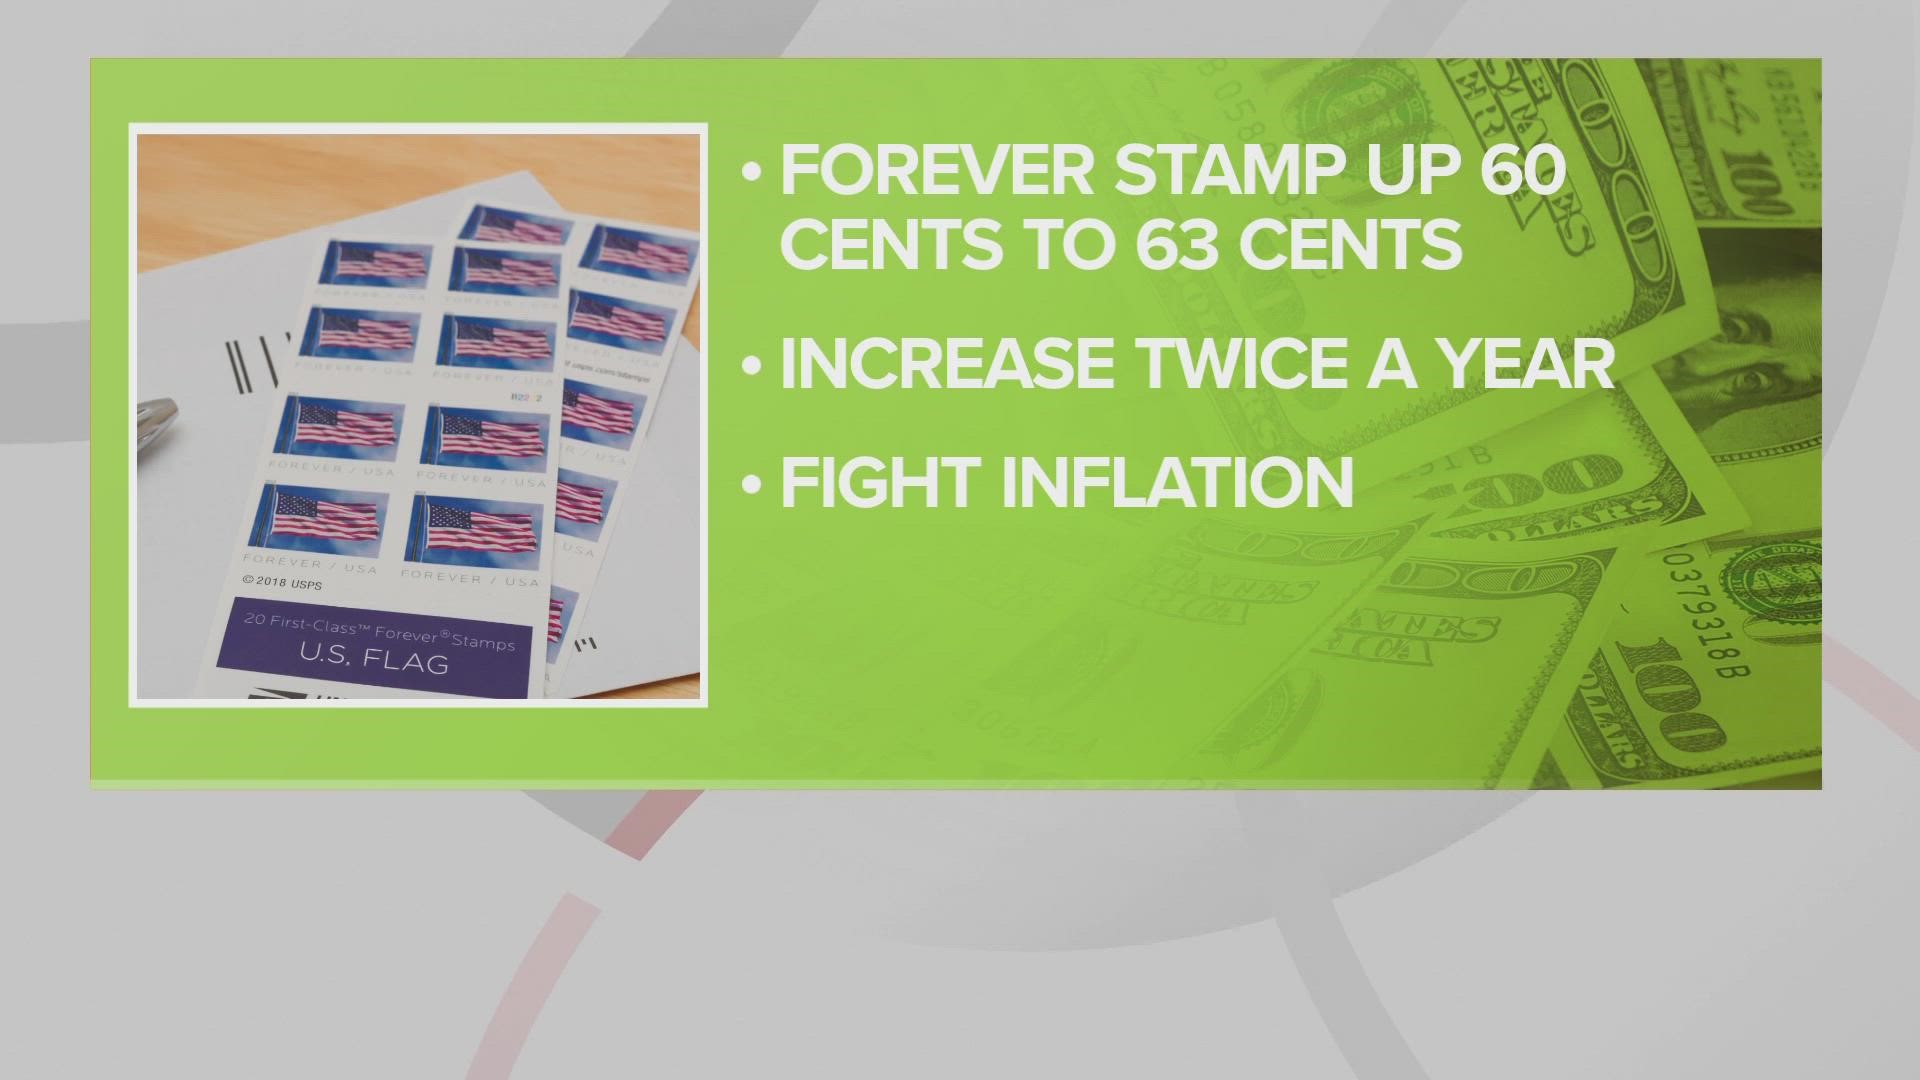 The price of Forever stamps increased from 60 cents to 63 cents on Sunday. USPS says the price hike will offset the rise in inflation.